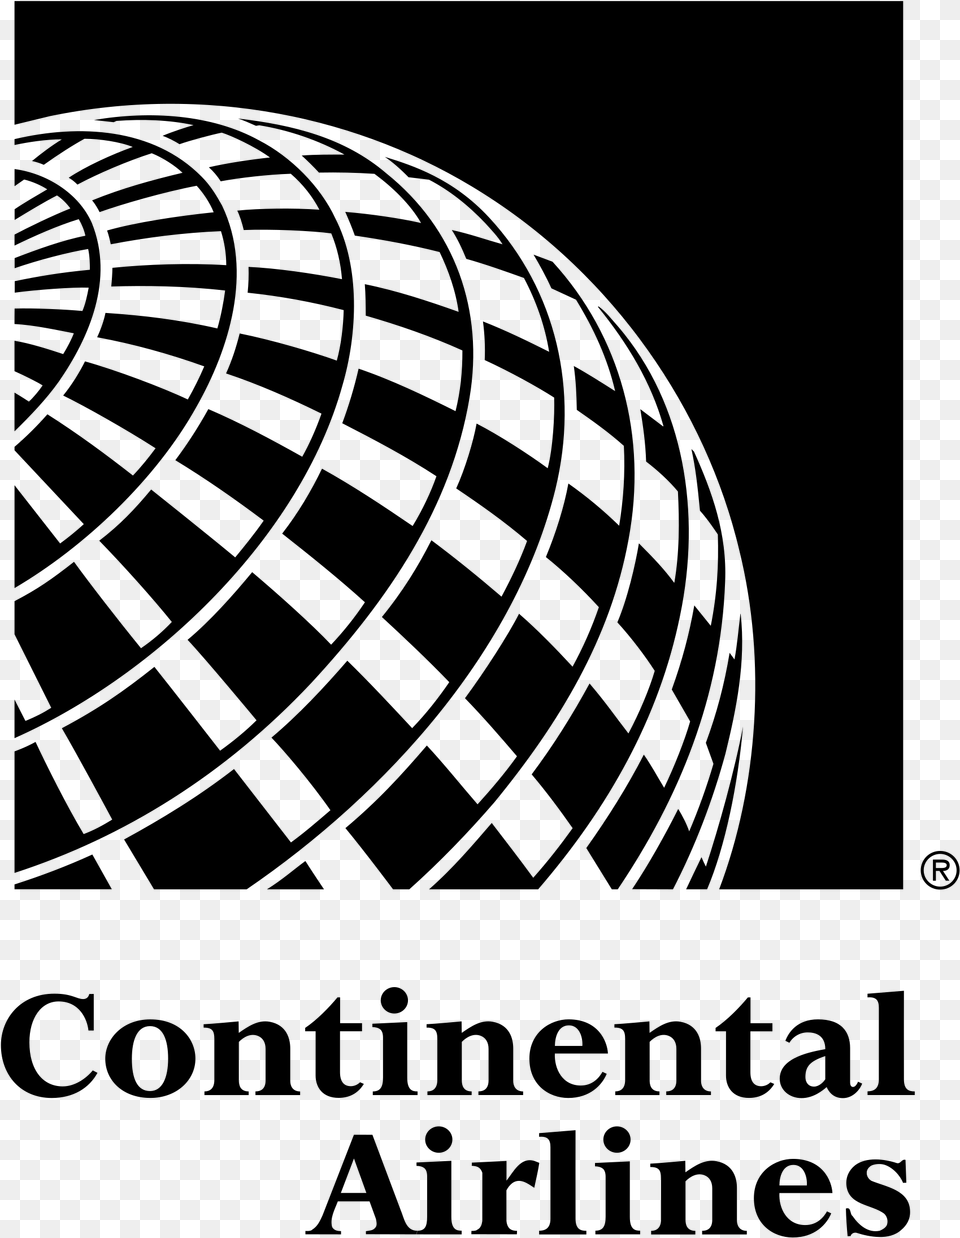 Continental Airlines Logo United Airlines Star Alliance Logo, Gray Free Transparent Png